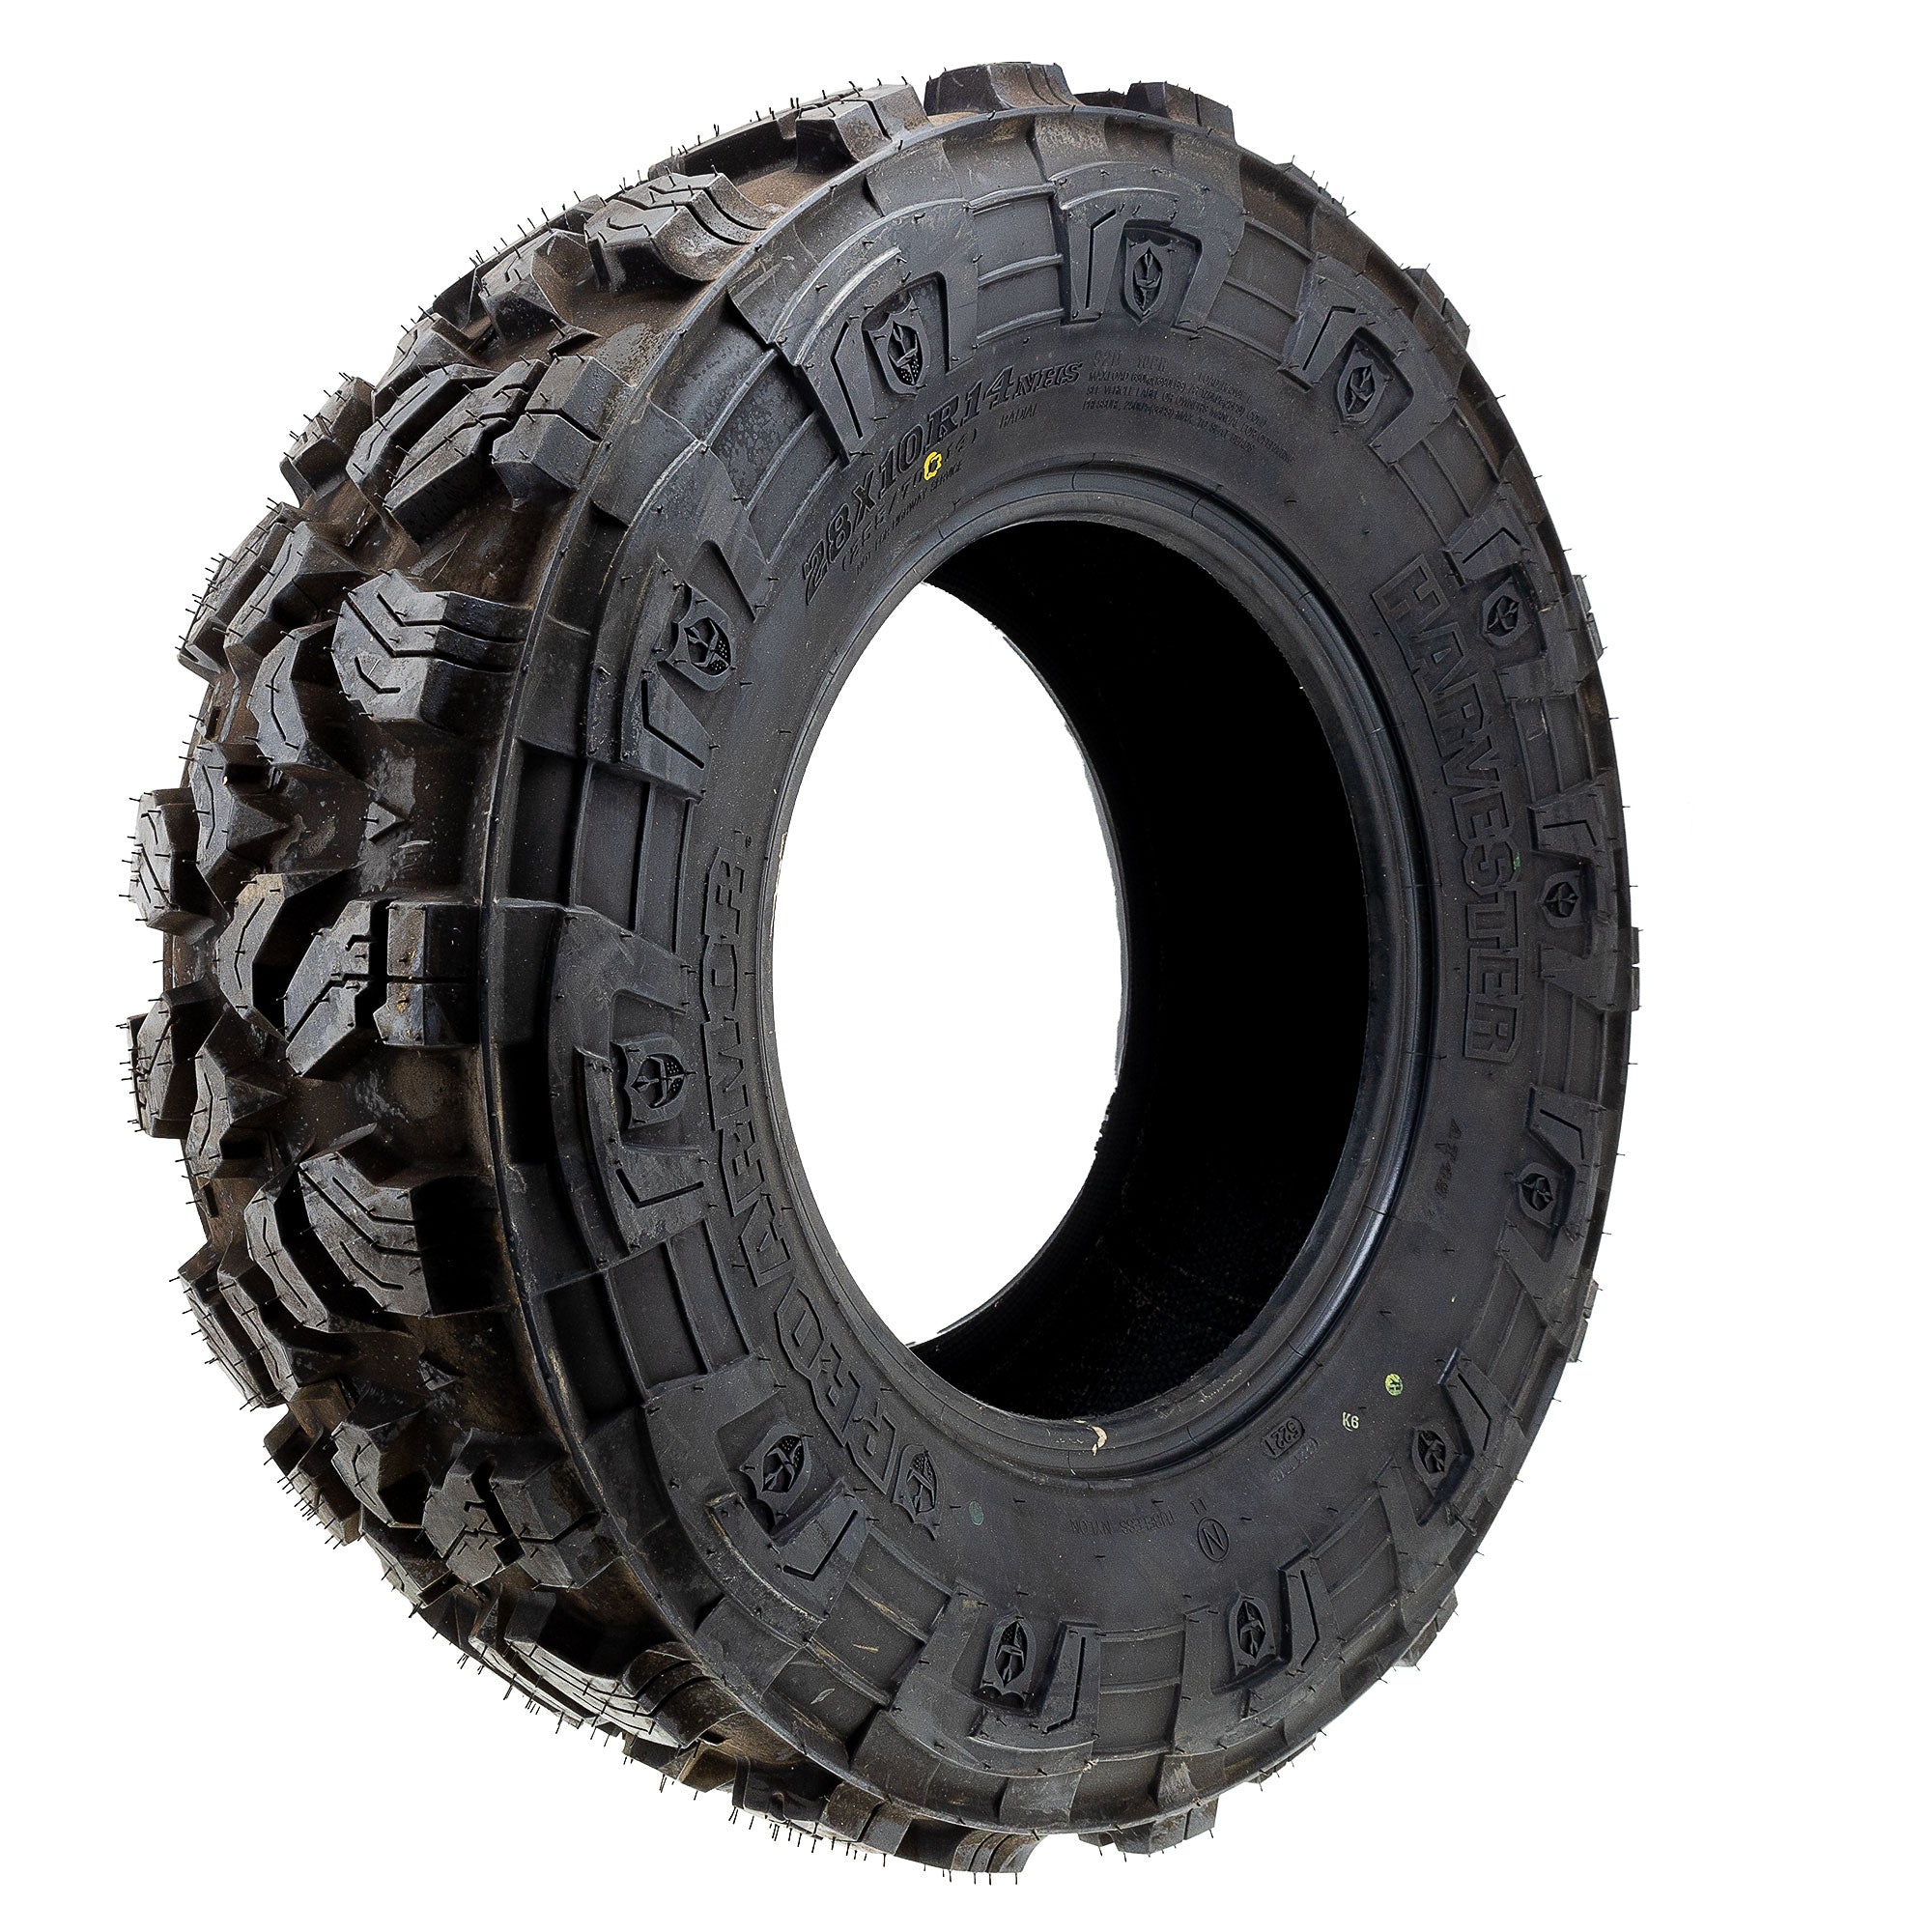 Pro Armor Front/Rear Harvester Tire 28X10R14 5416347